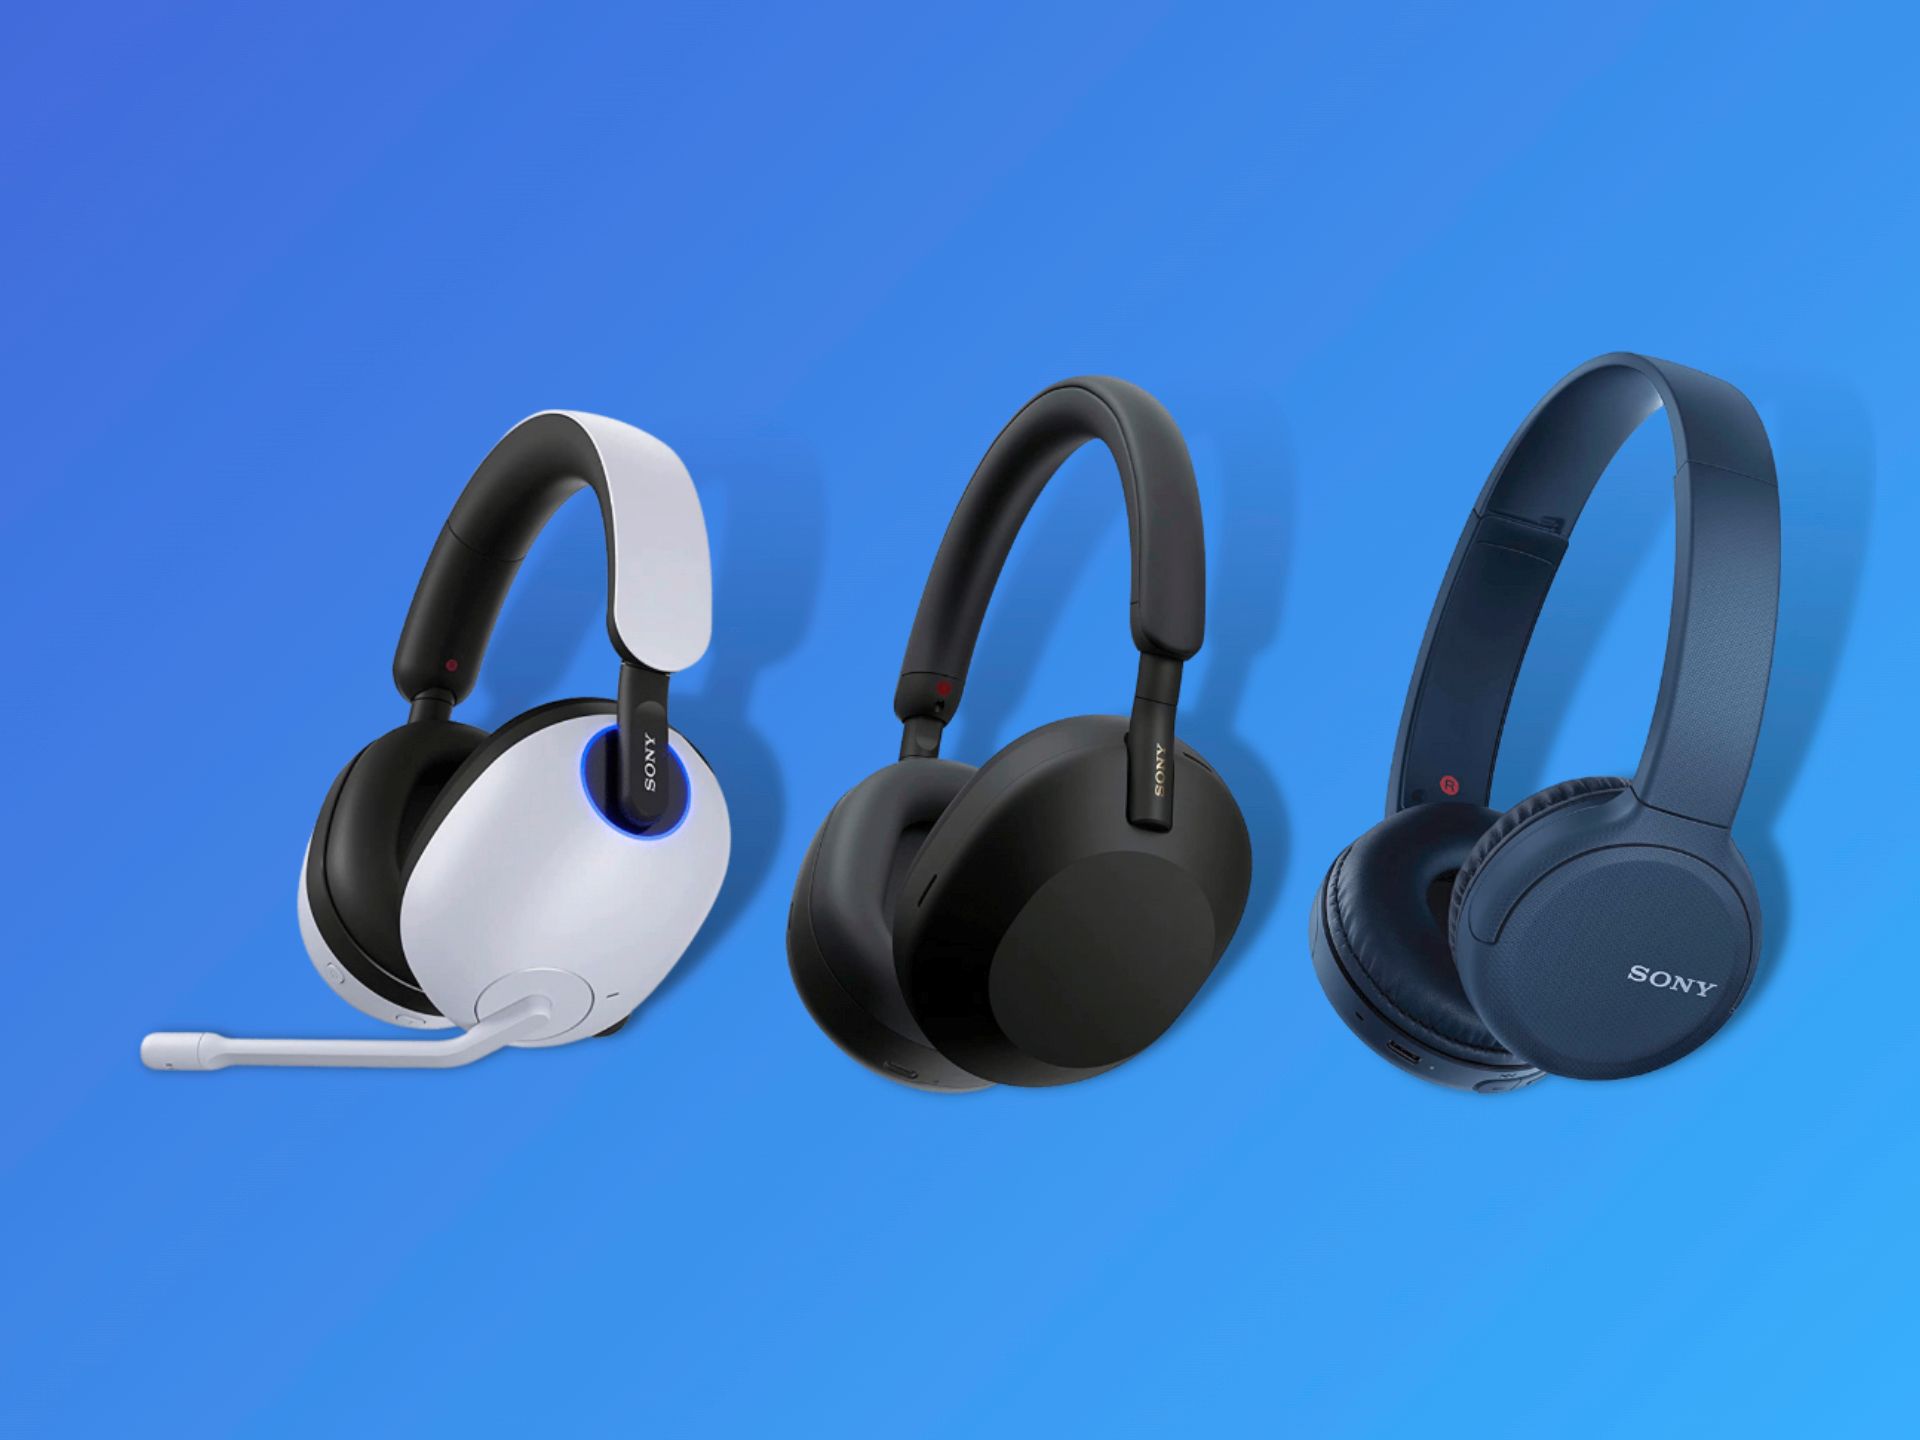 Sony wireless headphones and headsets